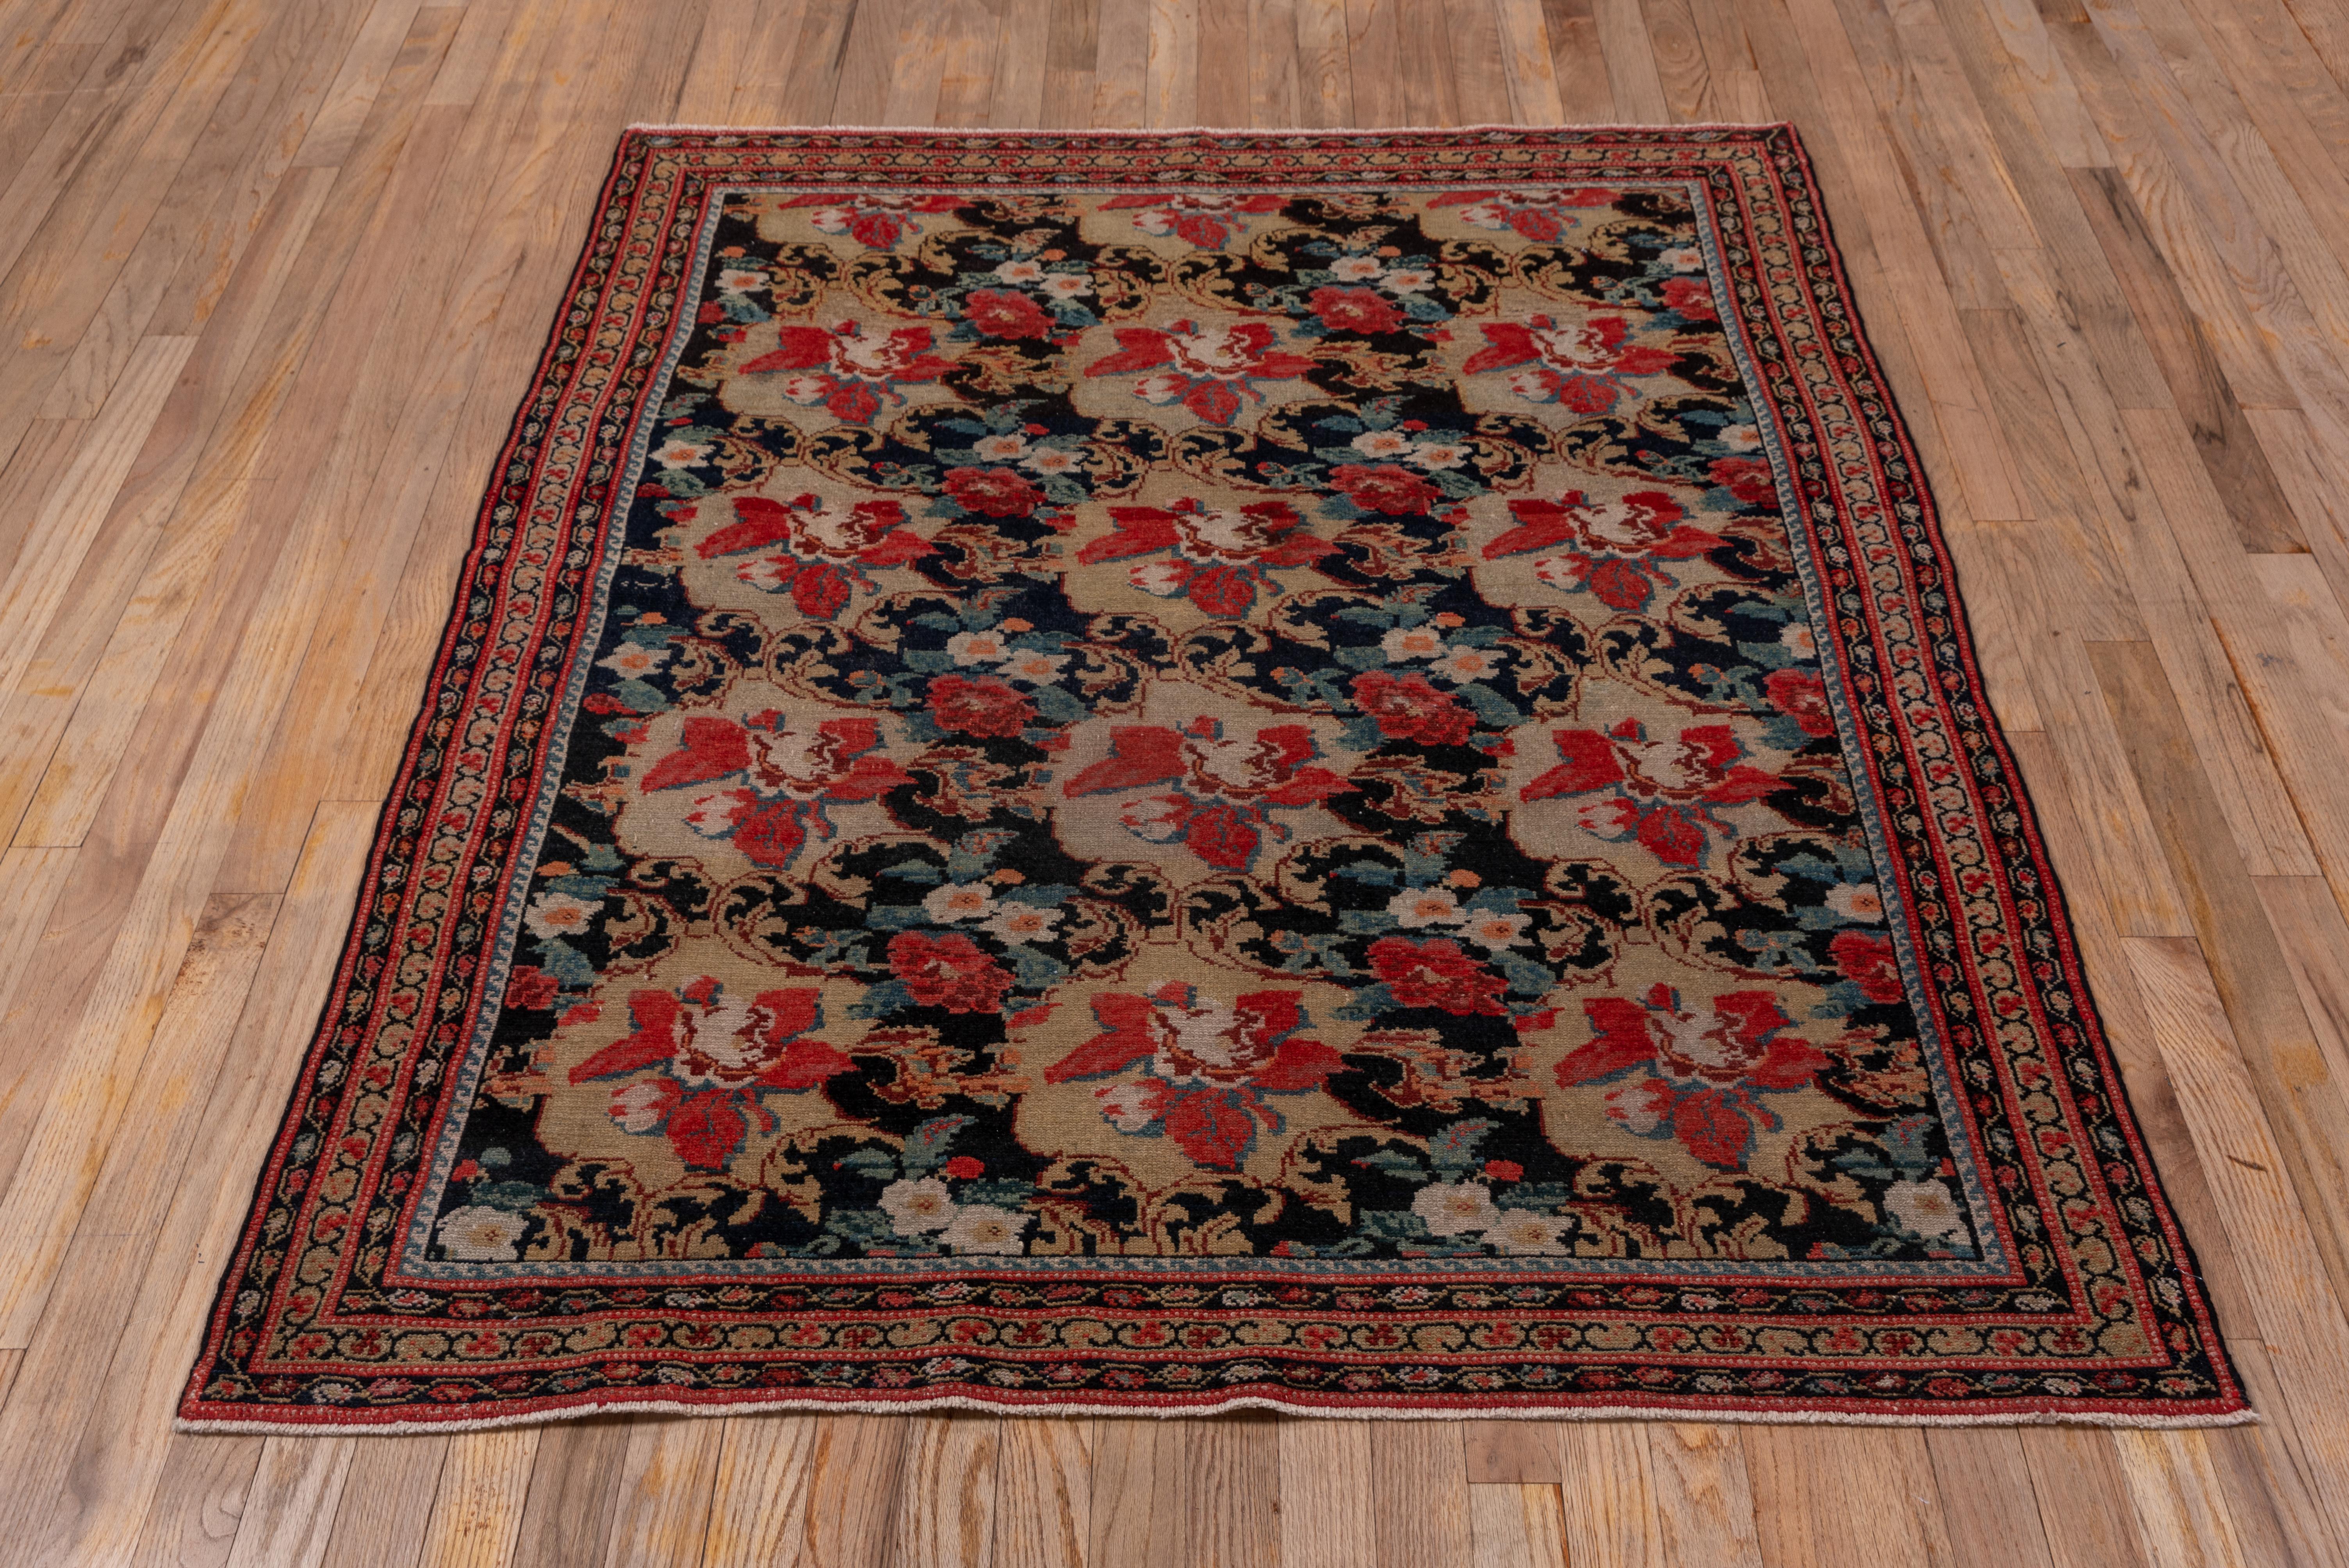 This moderately closely woven west Persian town scatter shows a black ground closely covered by a version of the European flower pattern - the Gol-i-Firangi - with red roses, acanthus leave and small ecru flowers. The narrow borders in brown and